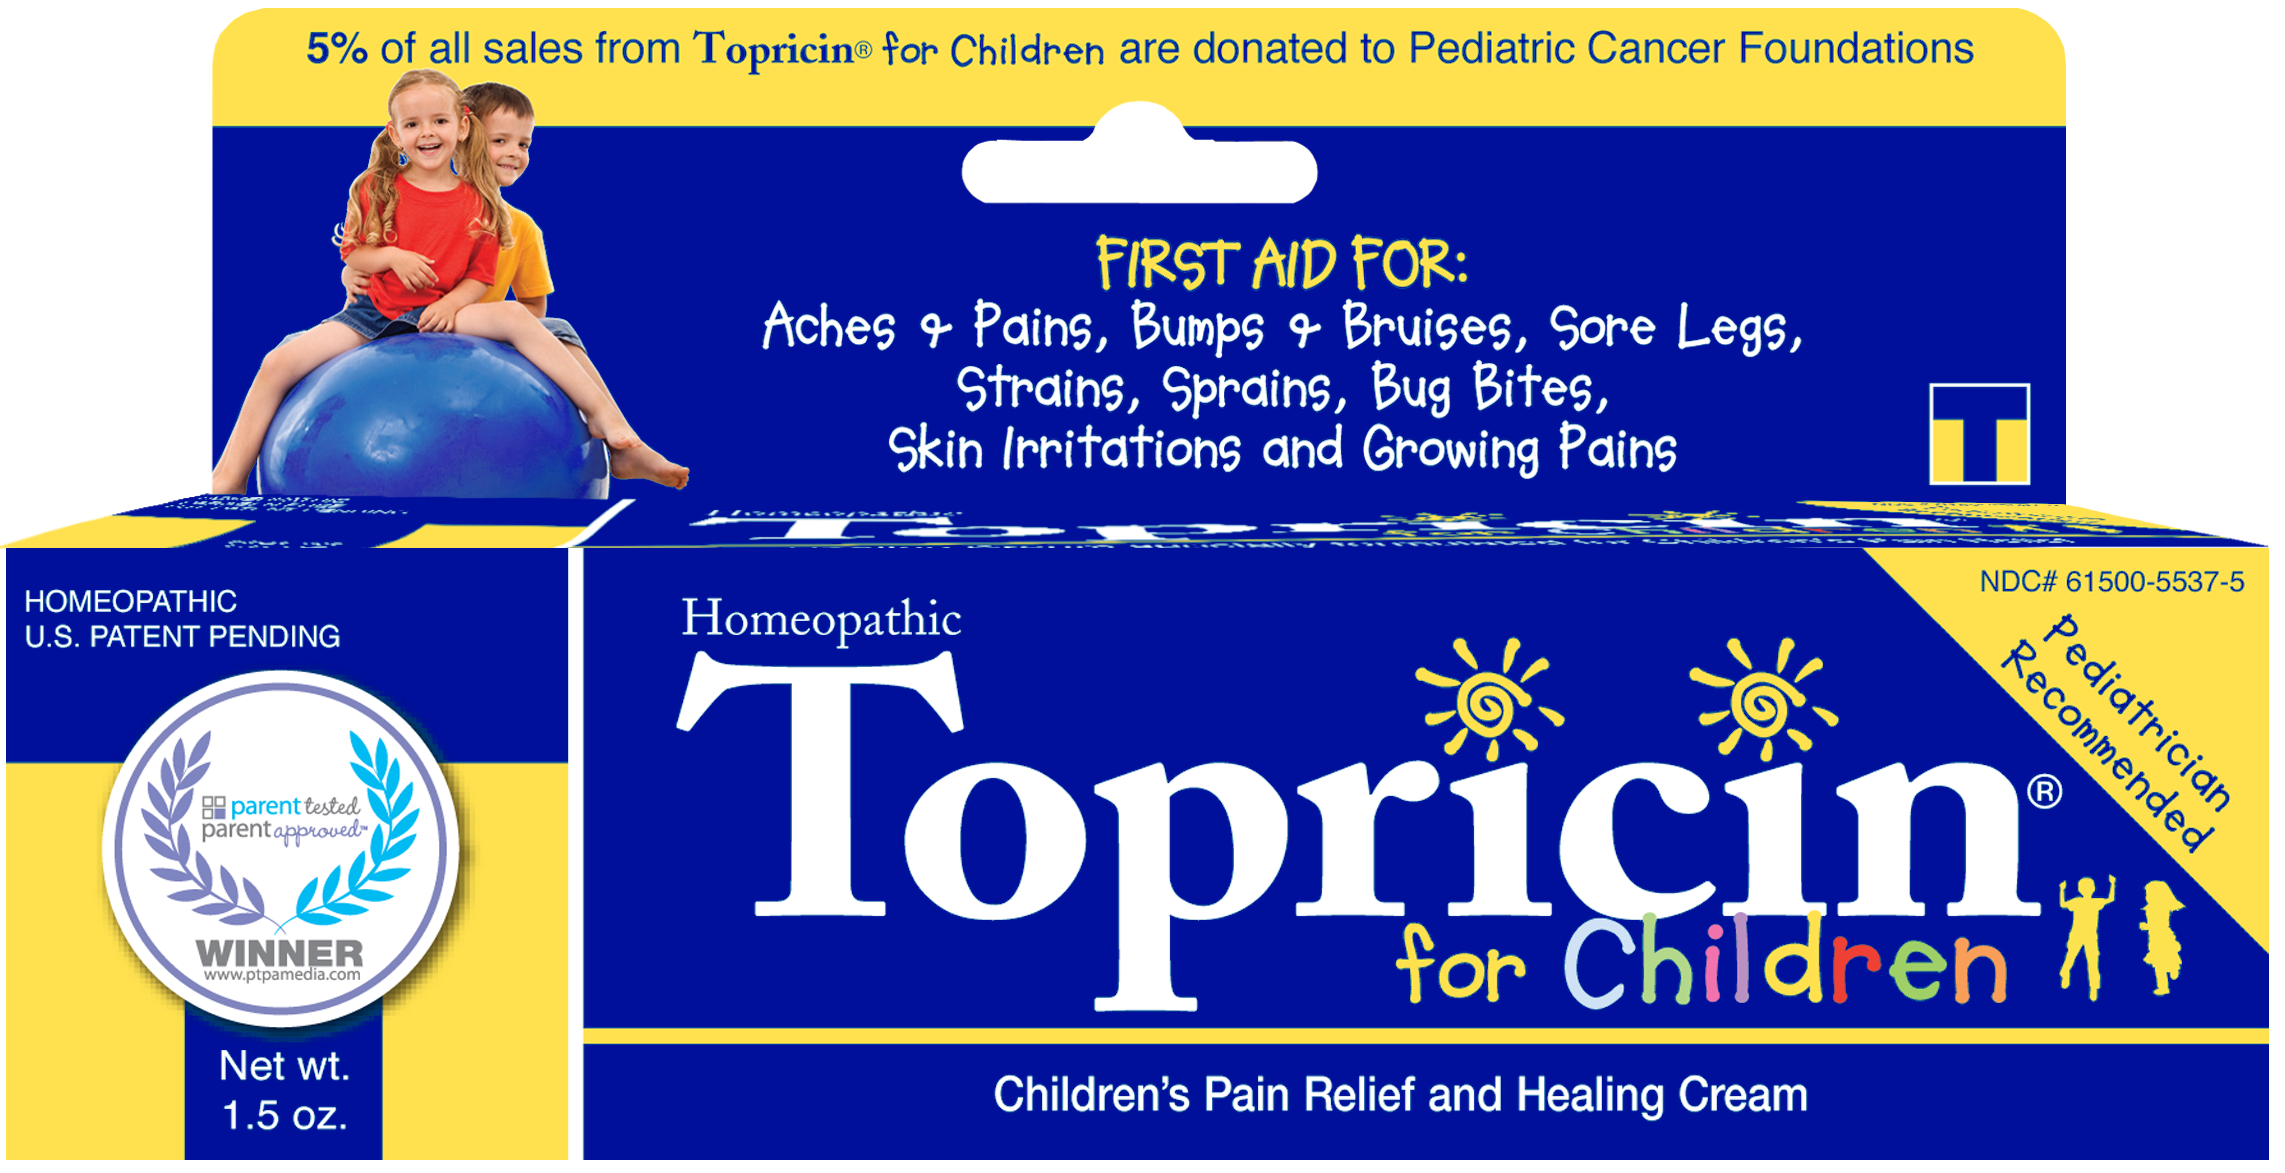 A winner of the Parent Tested/Parent Approved Seal of Approval, Topricin Junior brings soothing relief and provides rapid healing